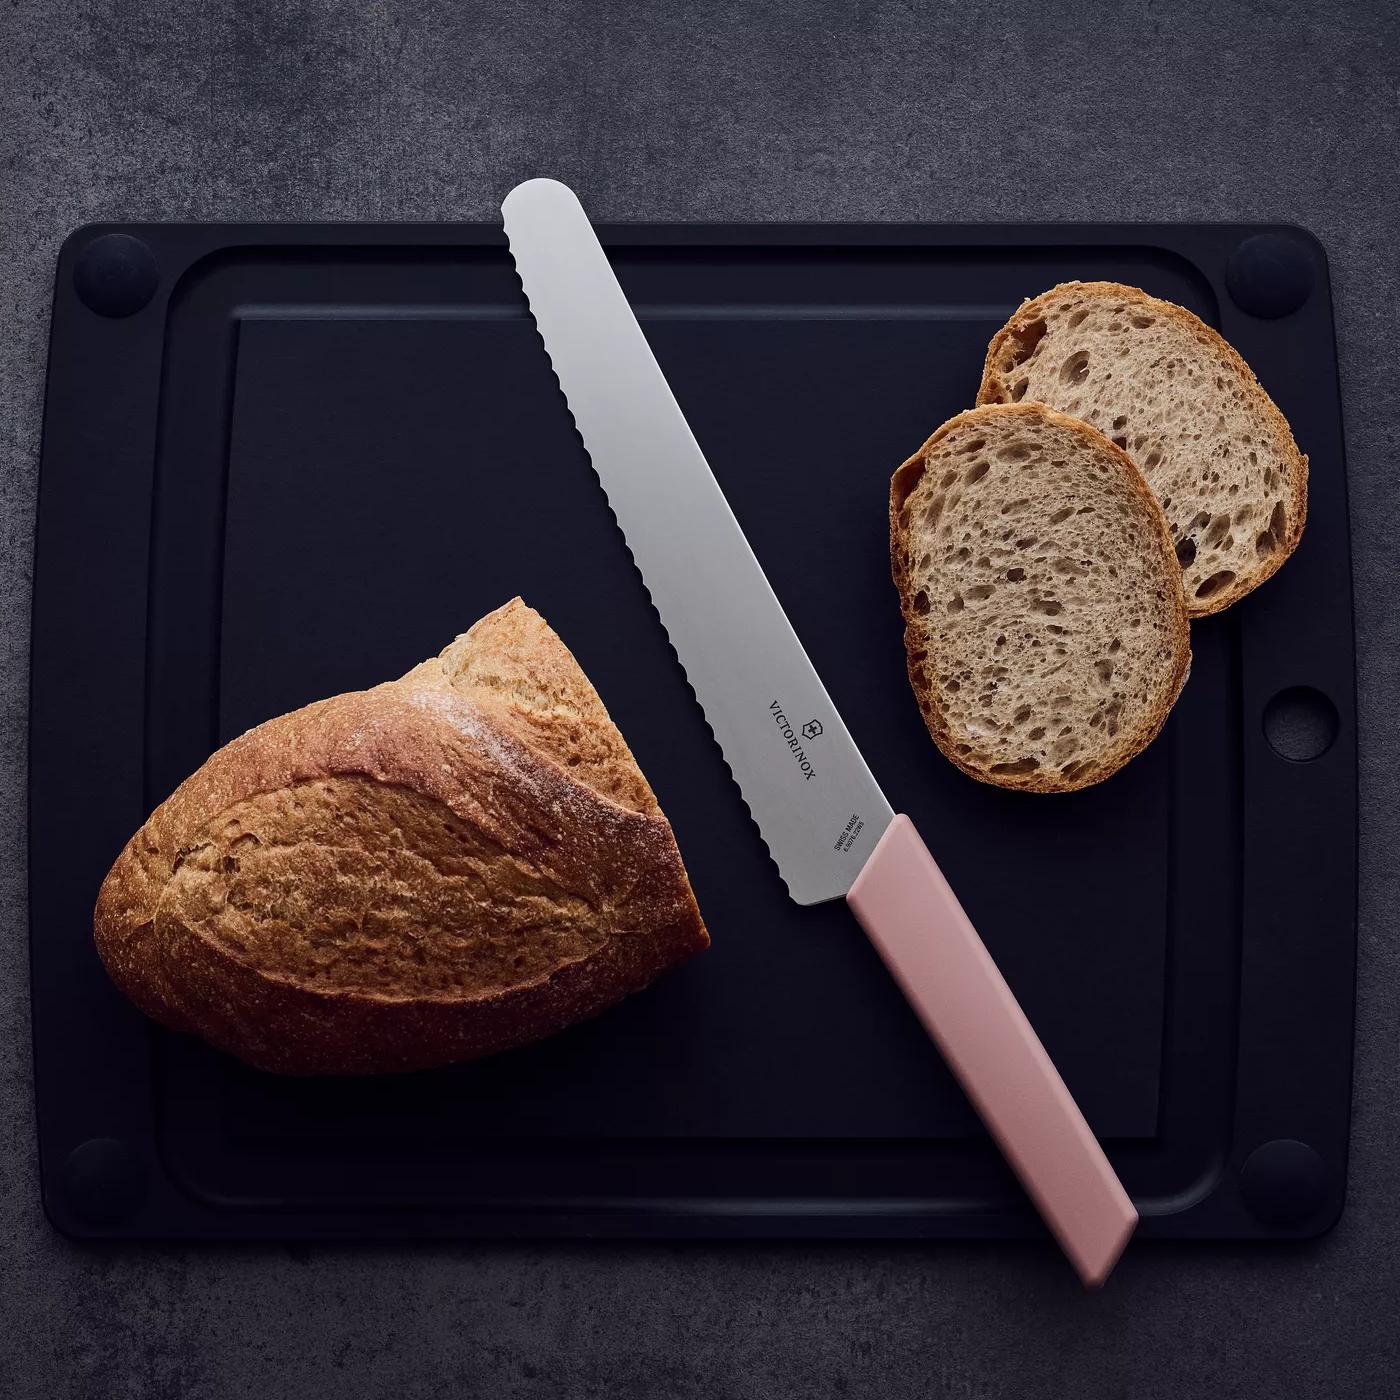 The Bread Knife